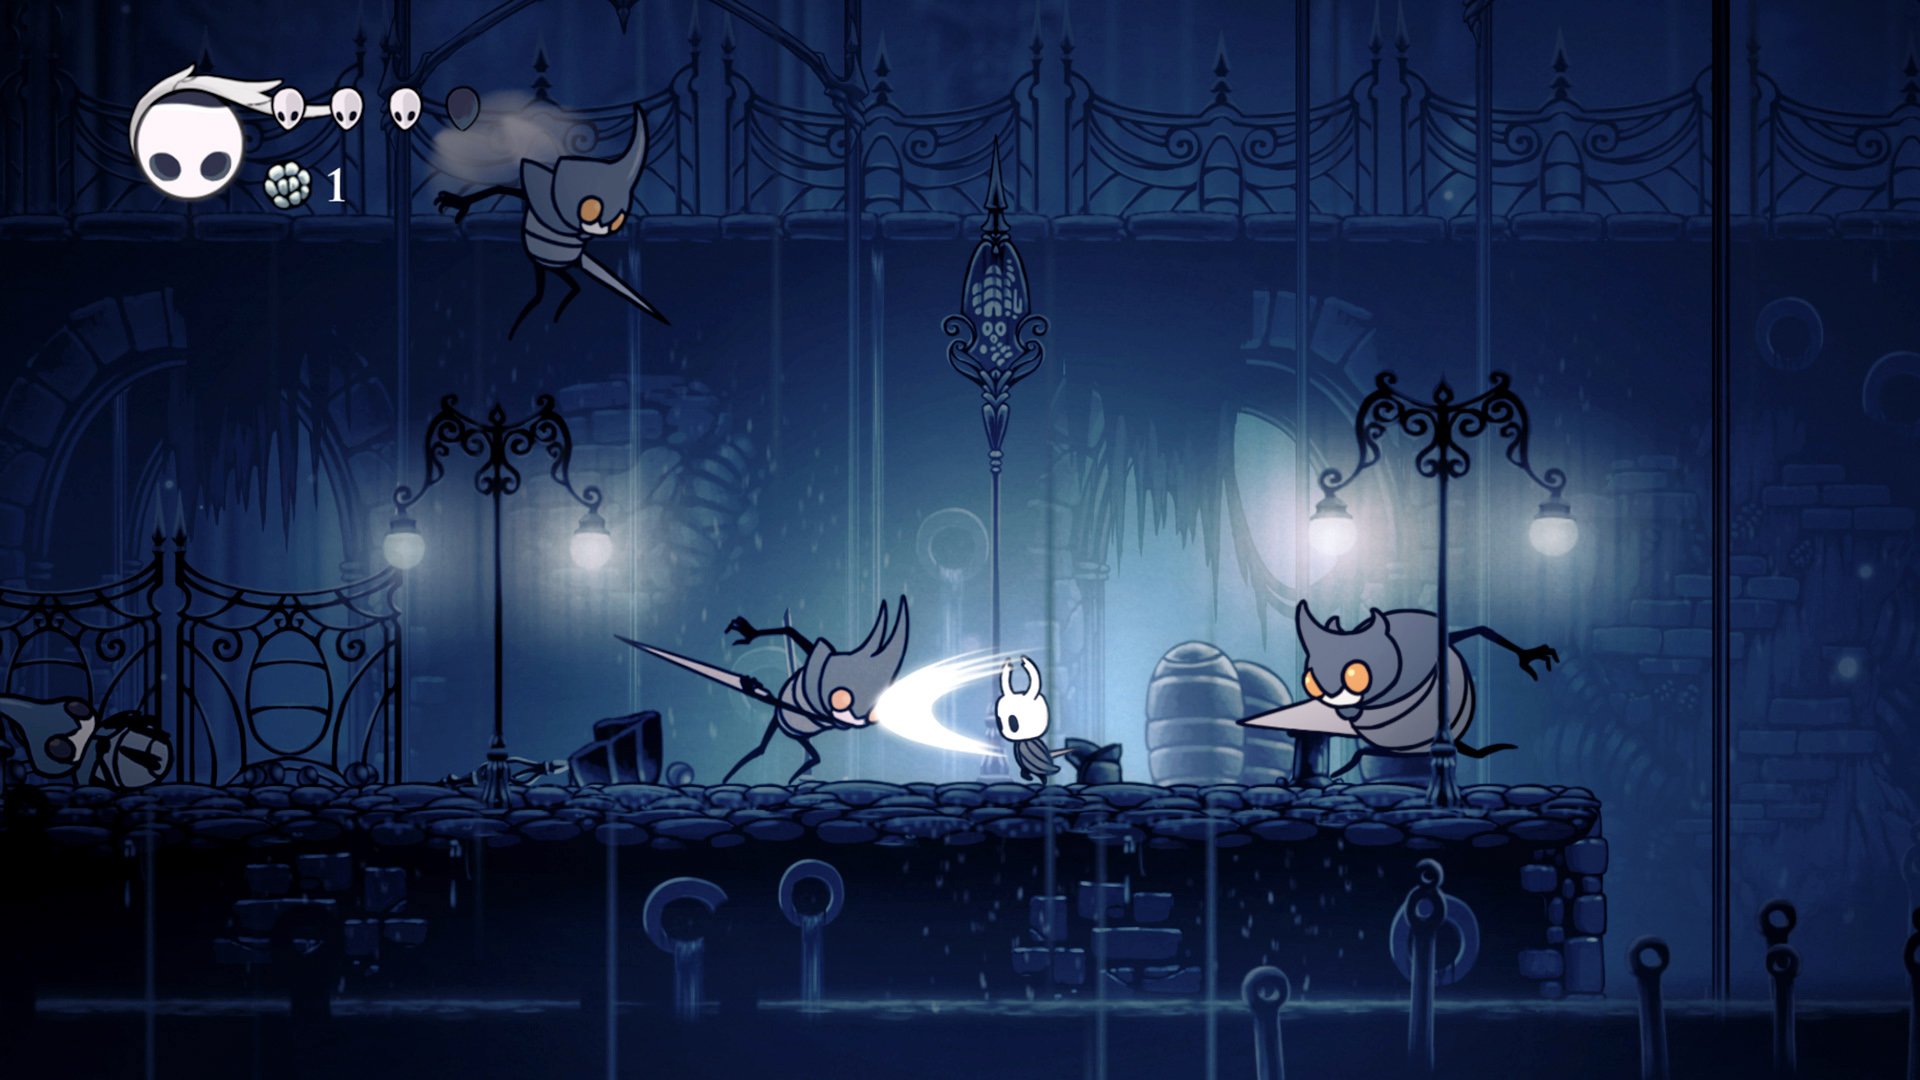 Hollow Knight is coming to Xbox One with a physical edition next year